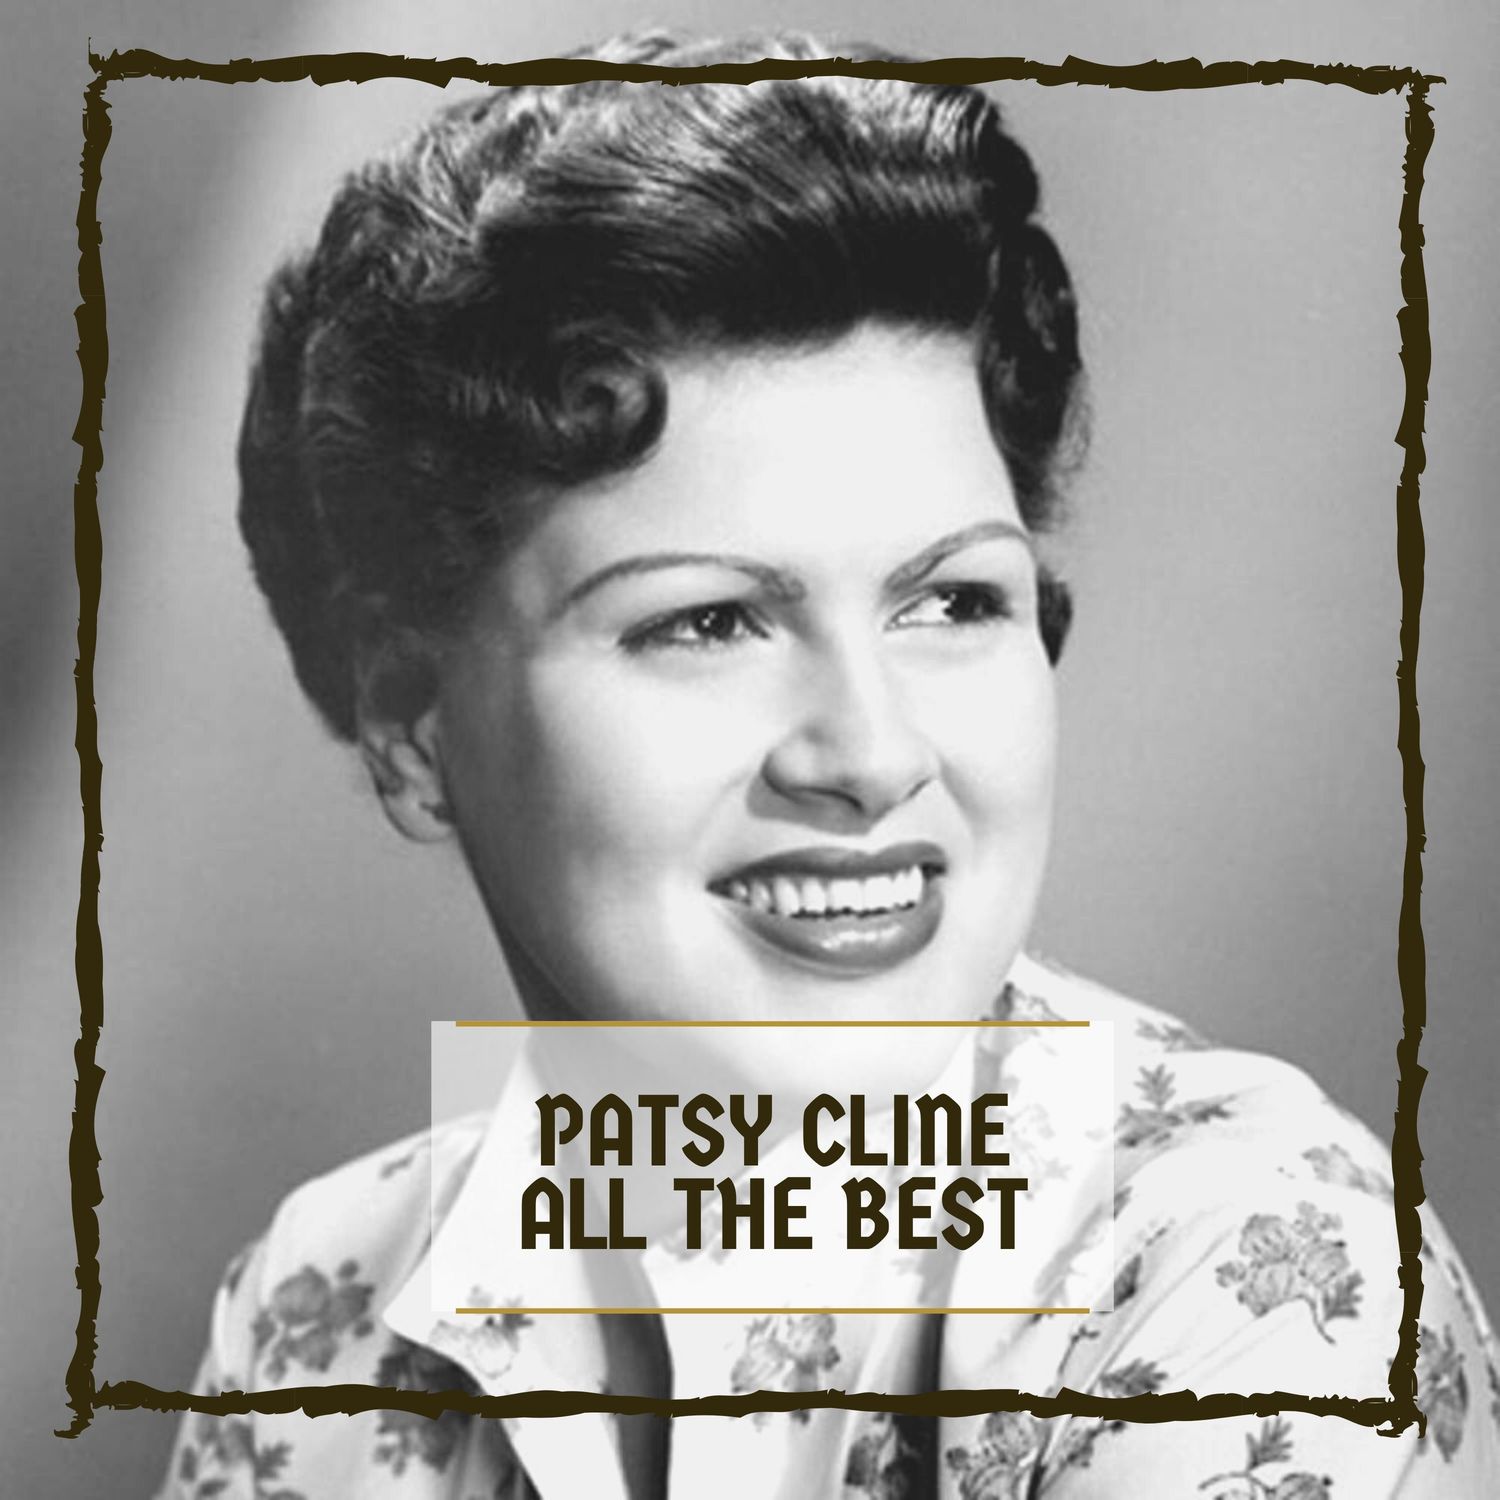 Just Out Of Reach_Patsy Cline_高音质在线试听_Just Out Of Reach歌词|歌曲下载_酷狗音乐